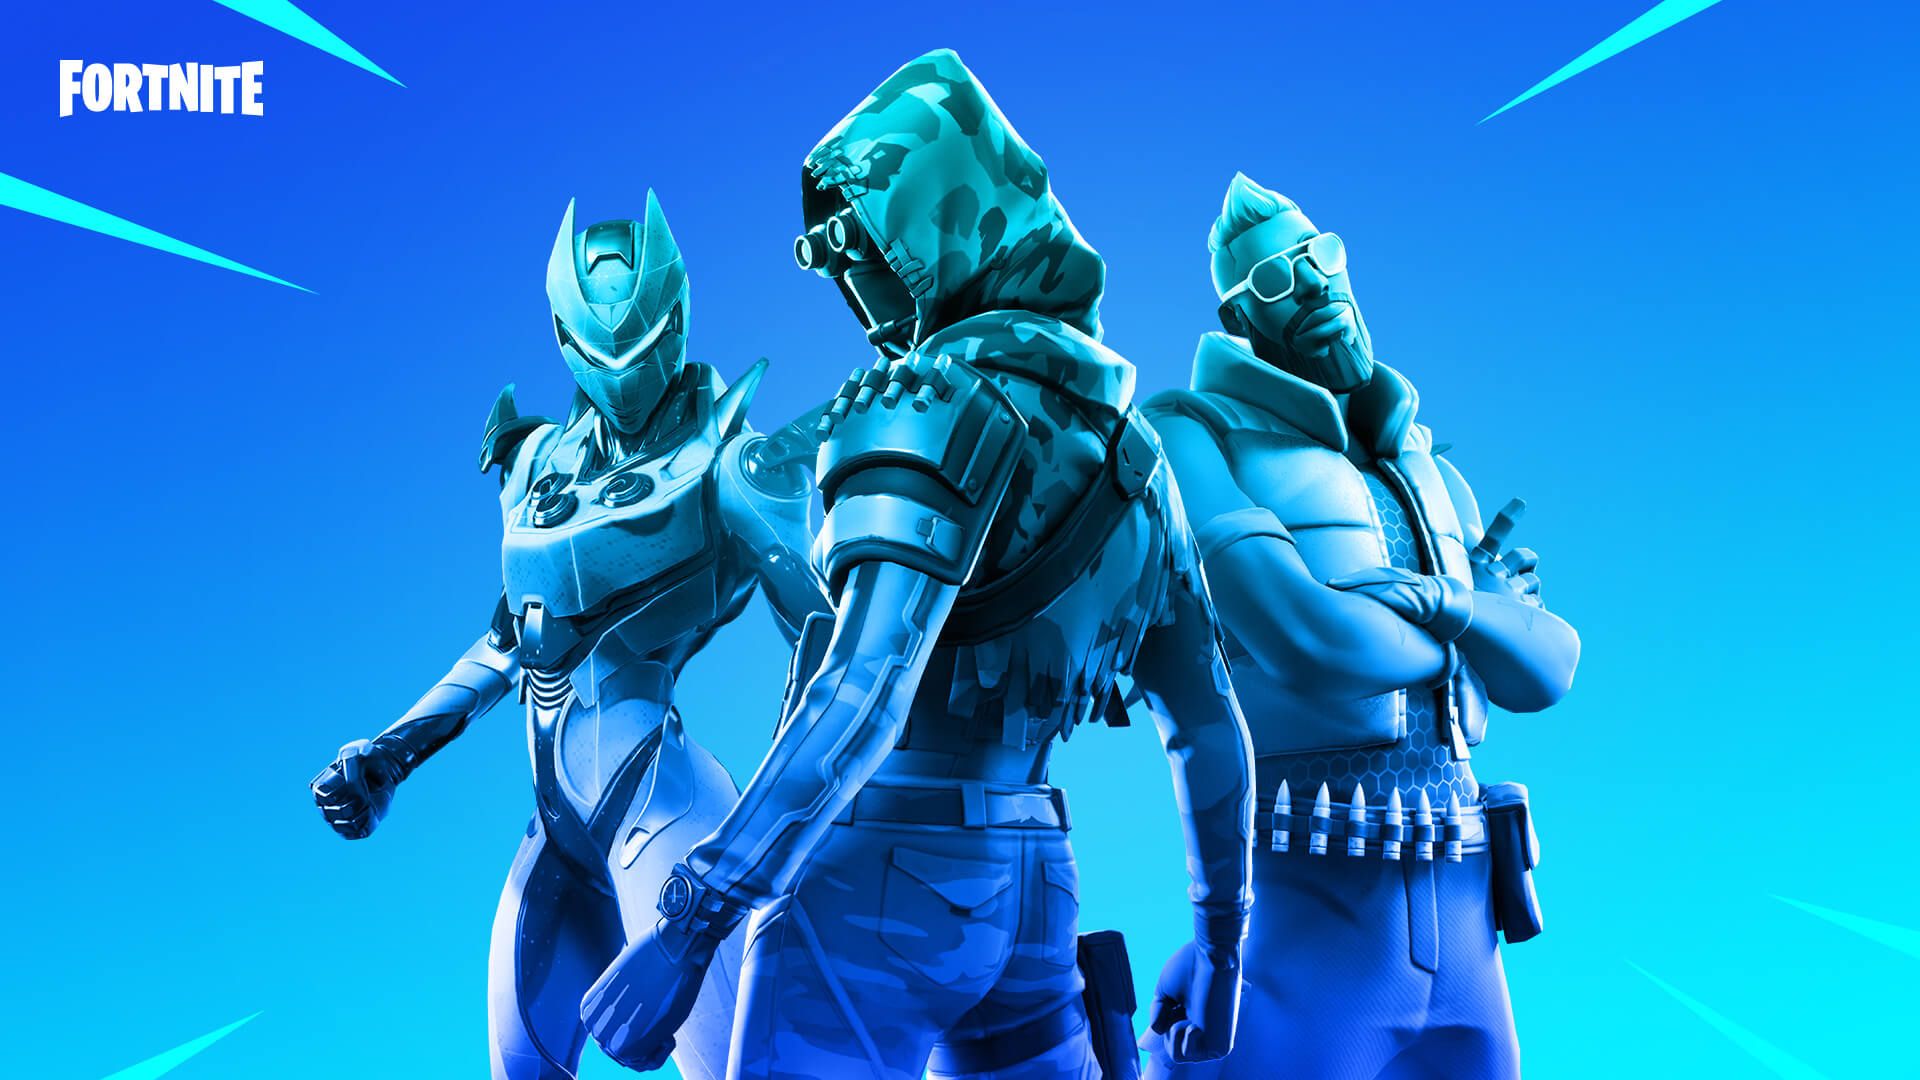 FORTNITE COMPETITIVE UPDATES FOR CHAPTER 2 SEASON 4